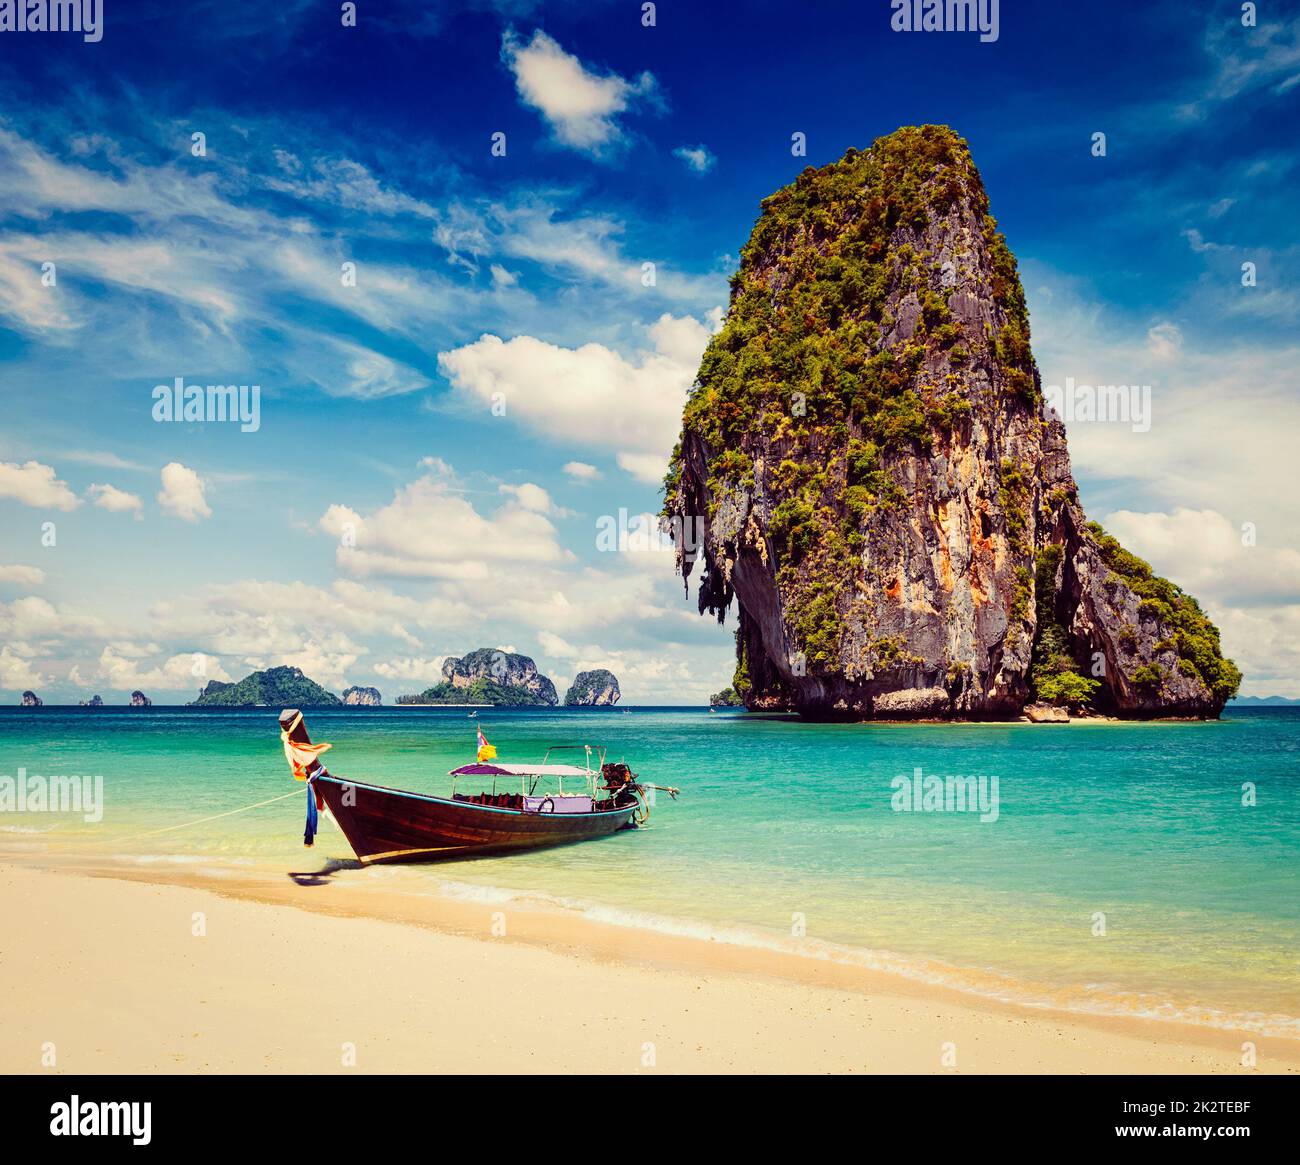 Thailand tropical vacation concept background Stock Photo